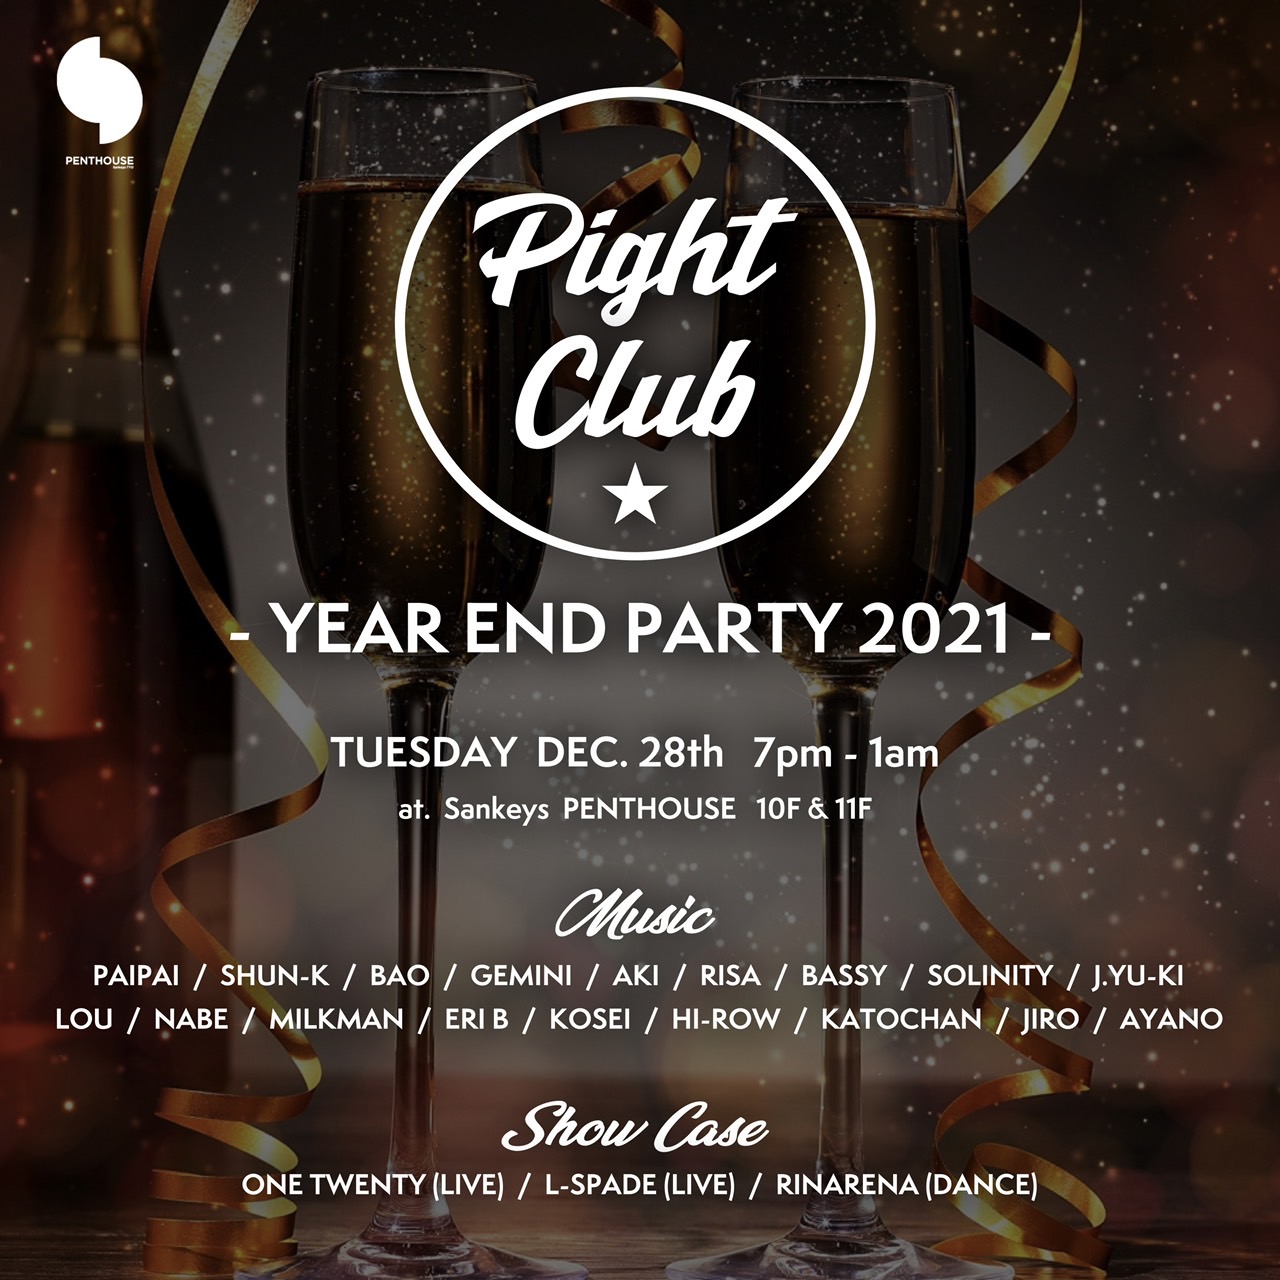 Pight Club -YEAR END PARTY 2021-